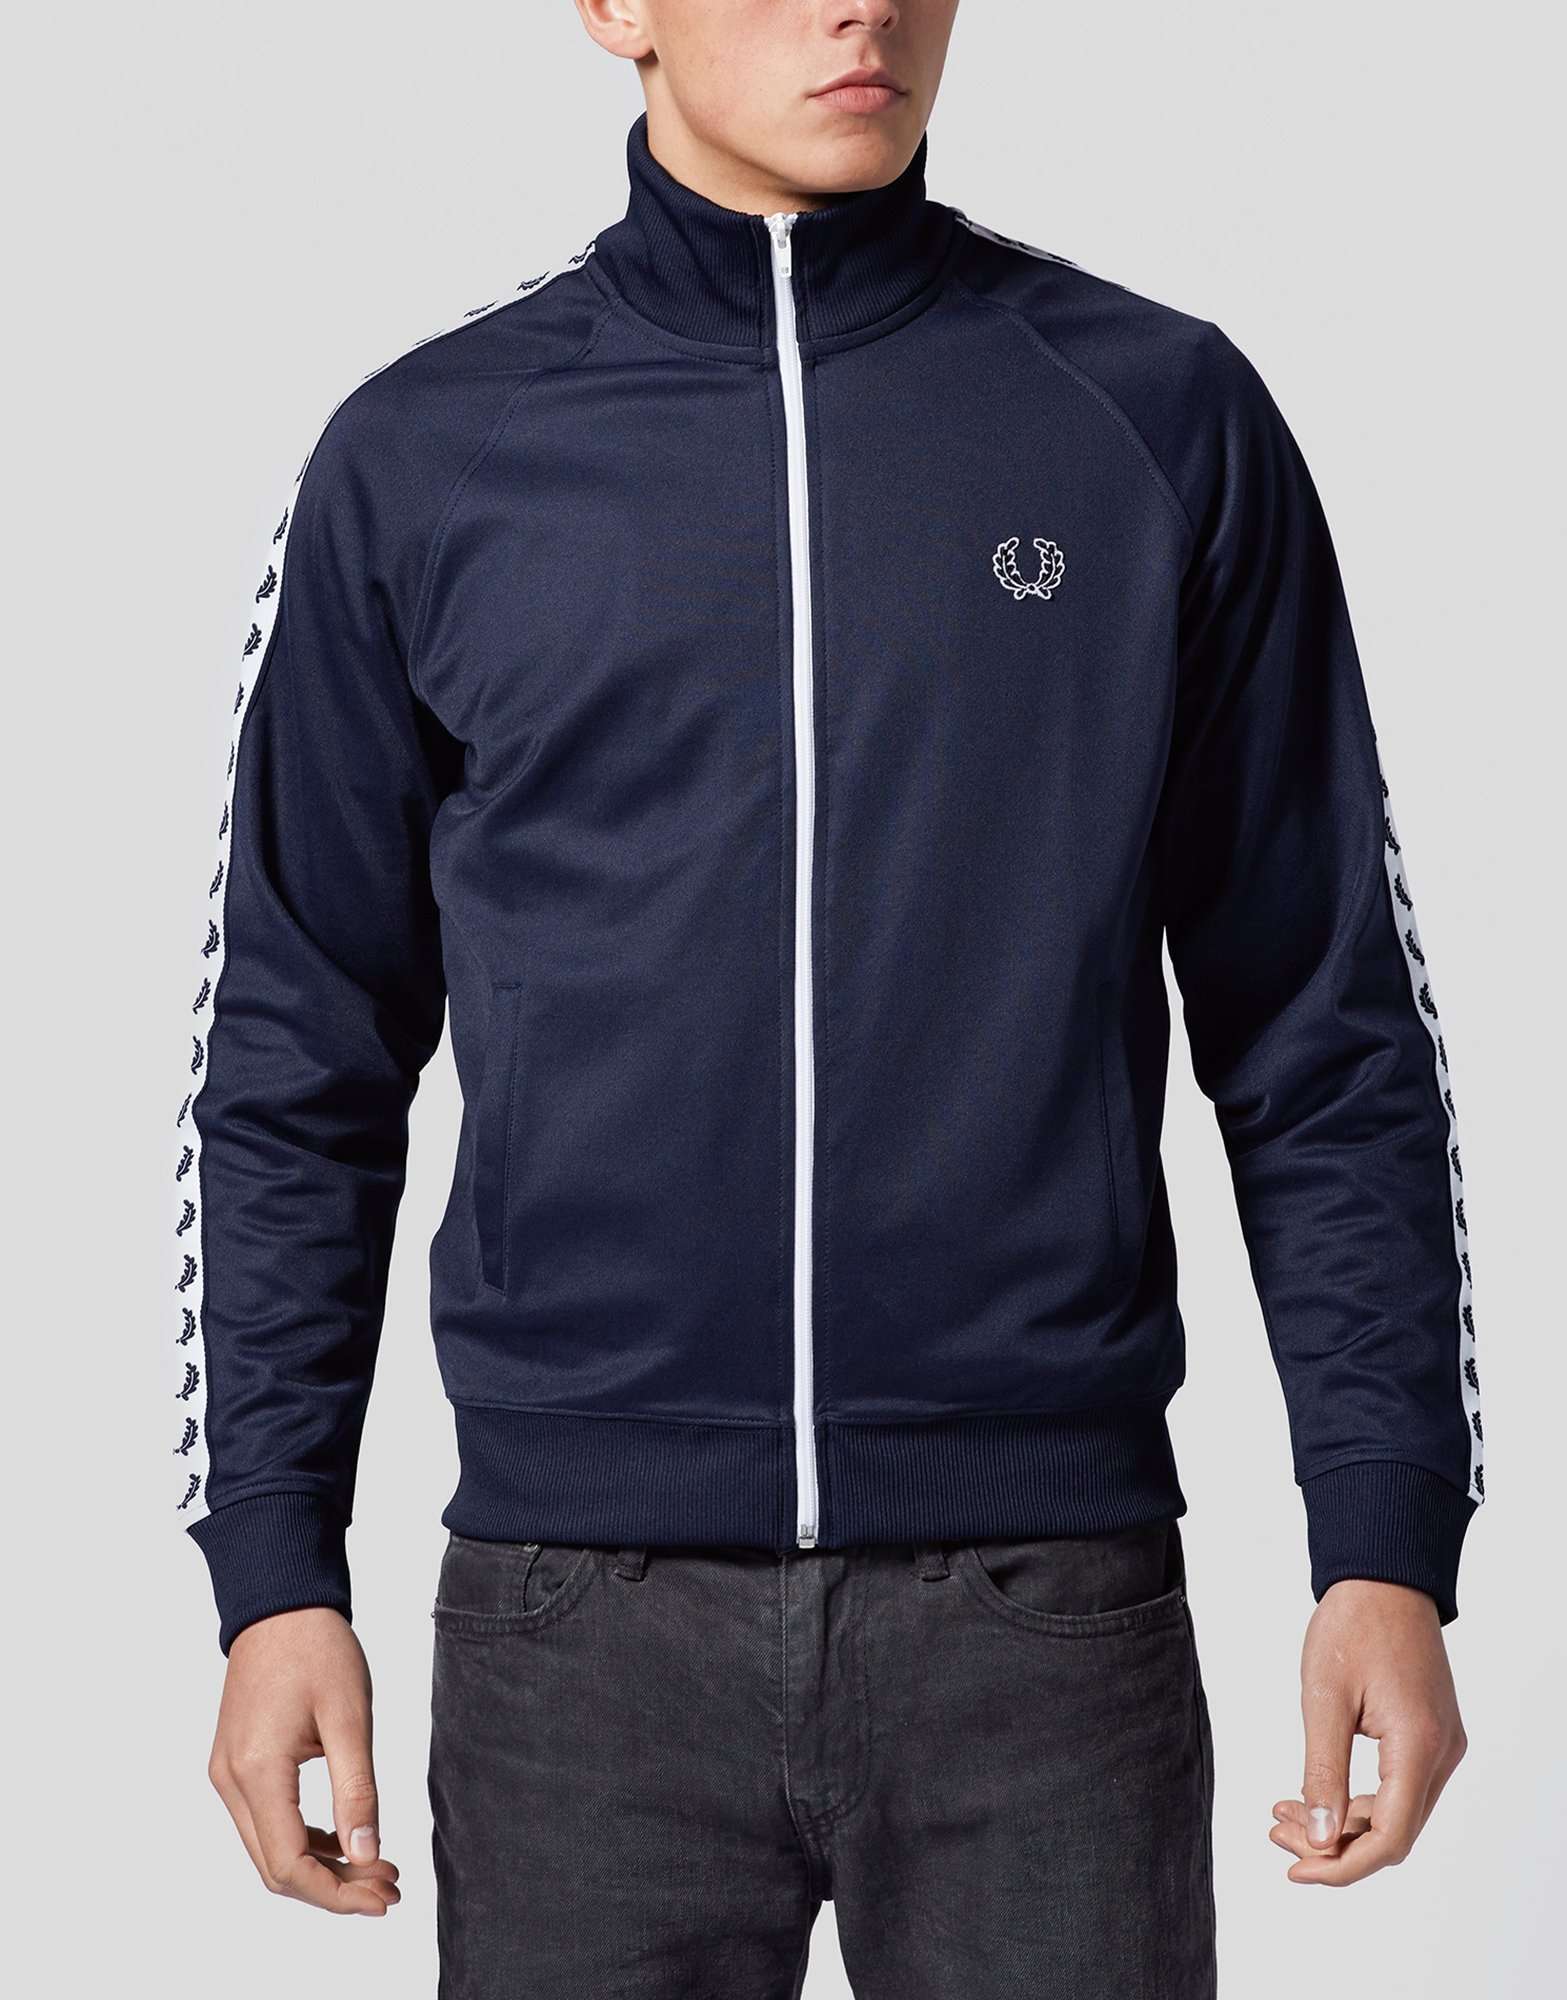 Fred Perry Laurel Wreath Tape Track Top | scotts Menswear